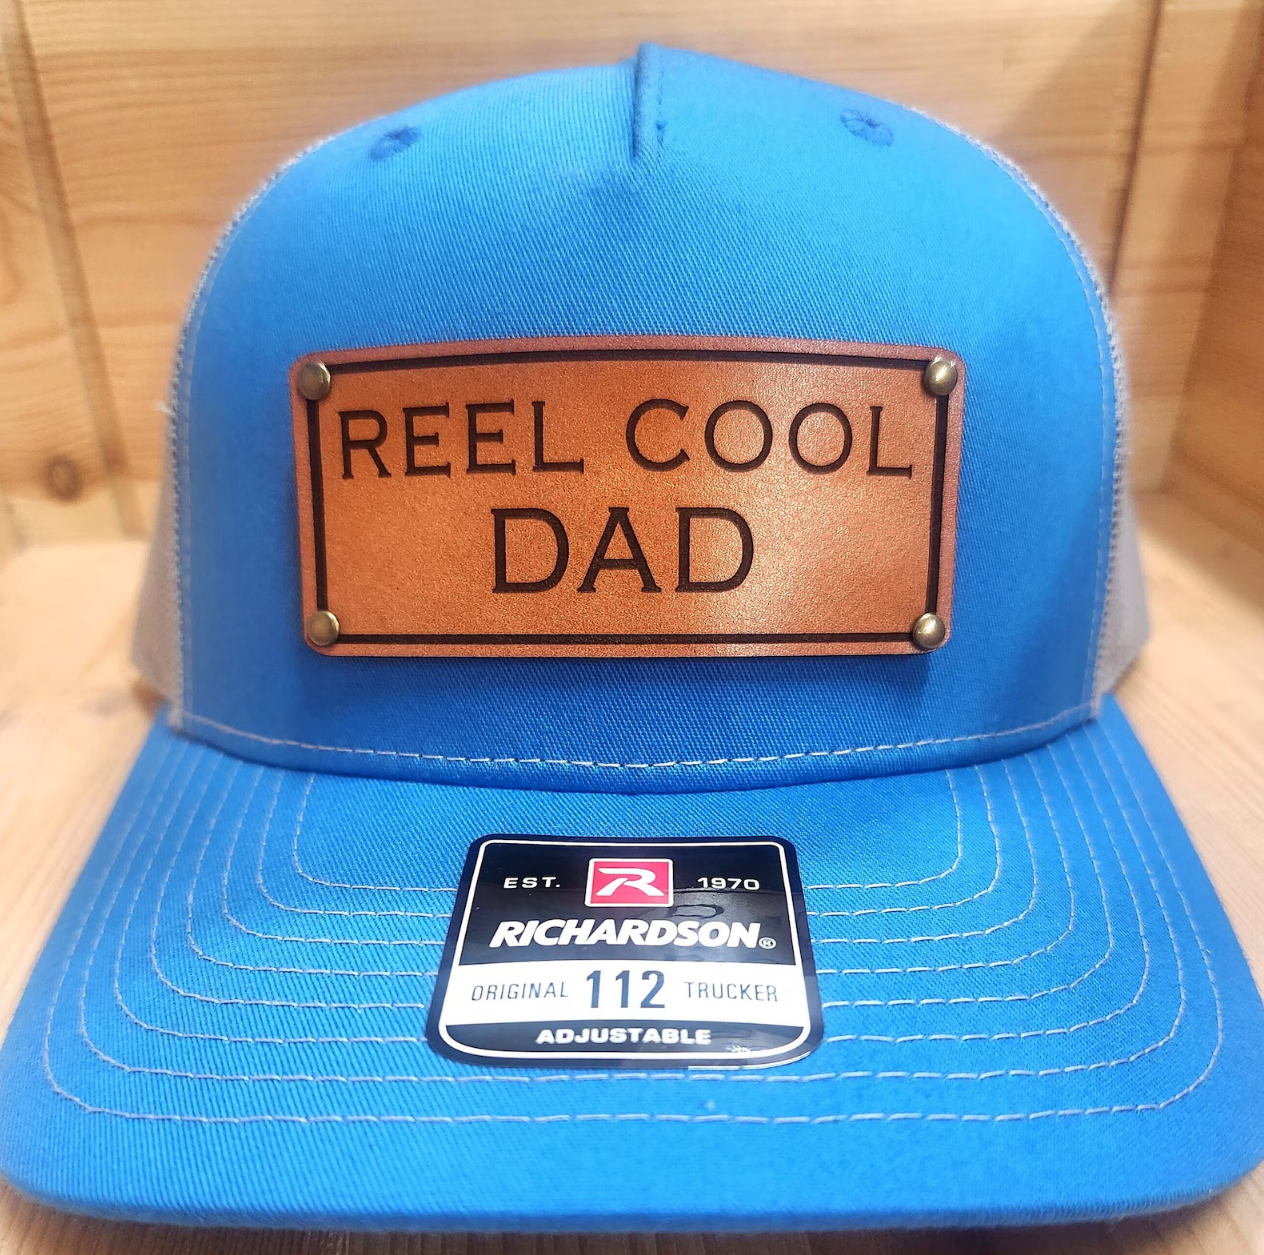 REEL COOL DAD hat - Fishing hat - hat for dad